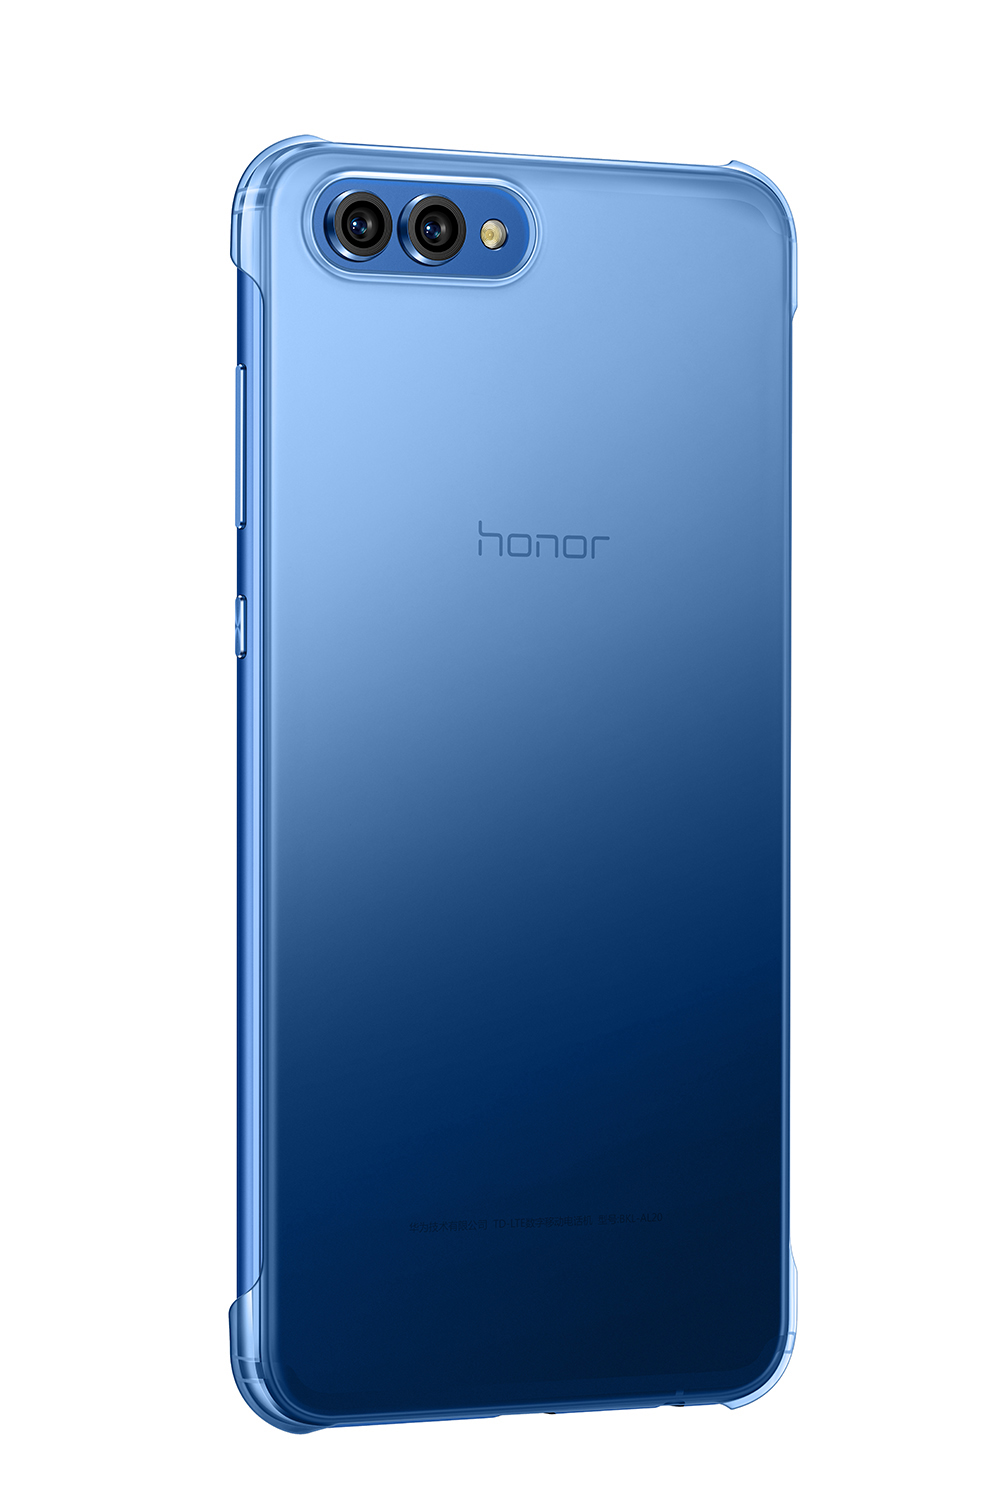 HONOR Magnet, Backcover, Honor, Blau 10, View